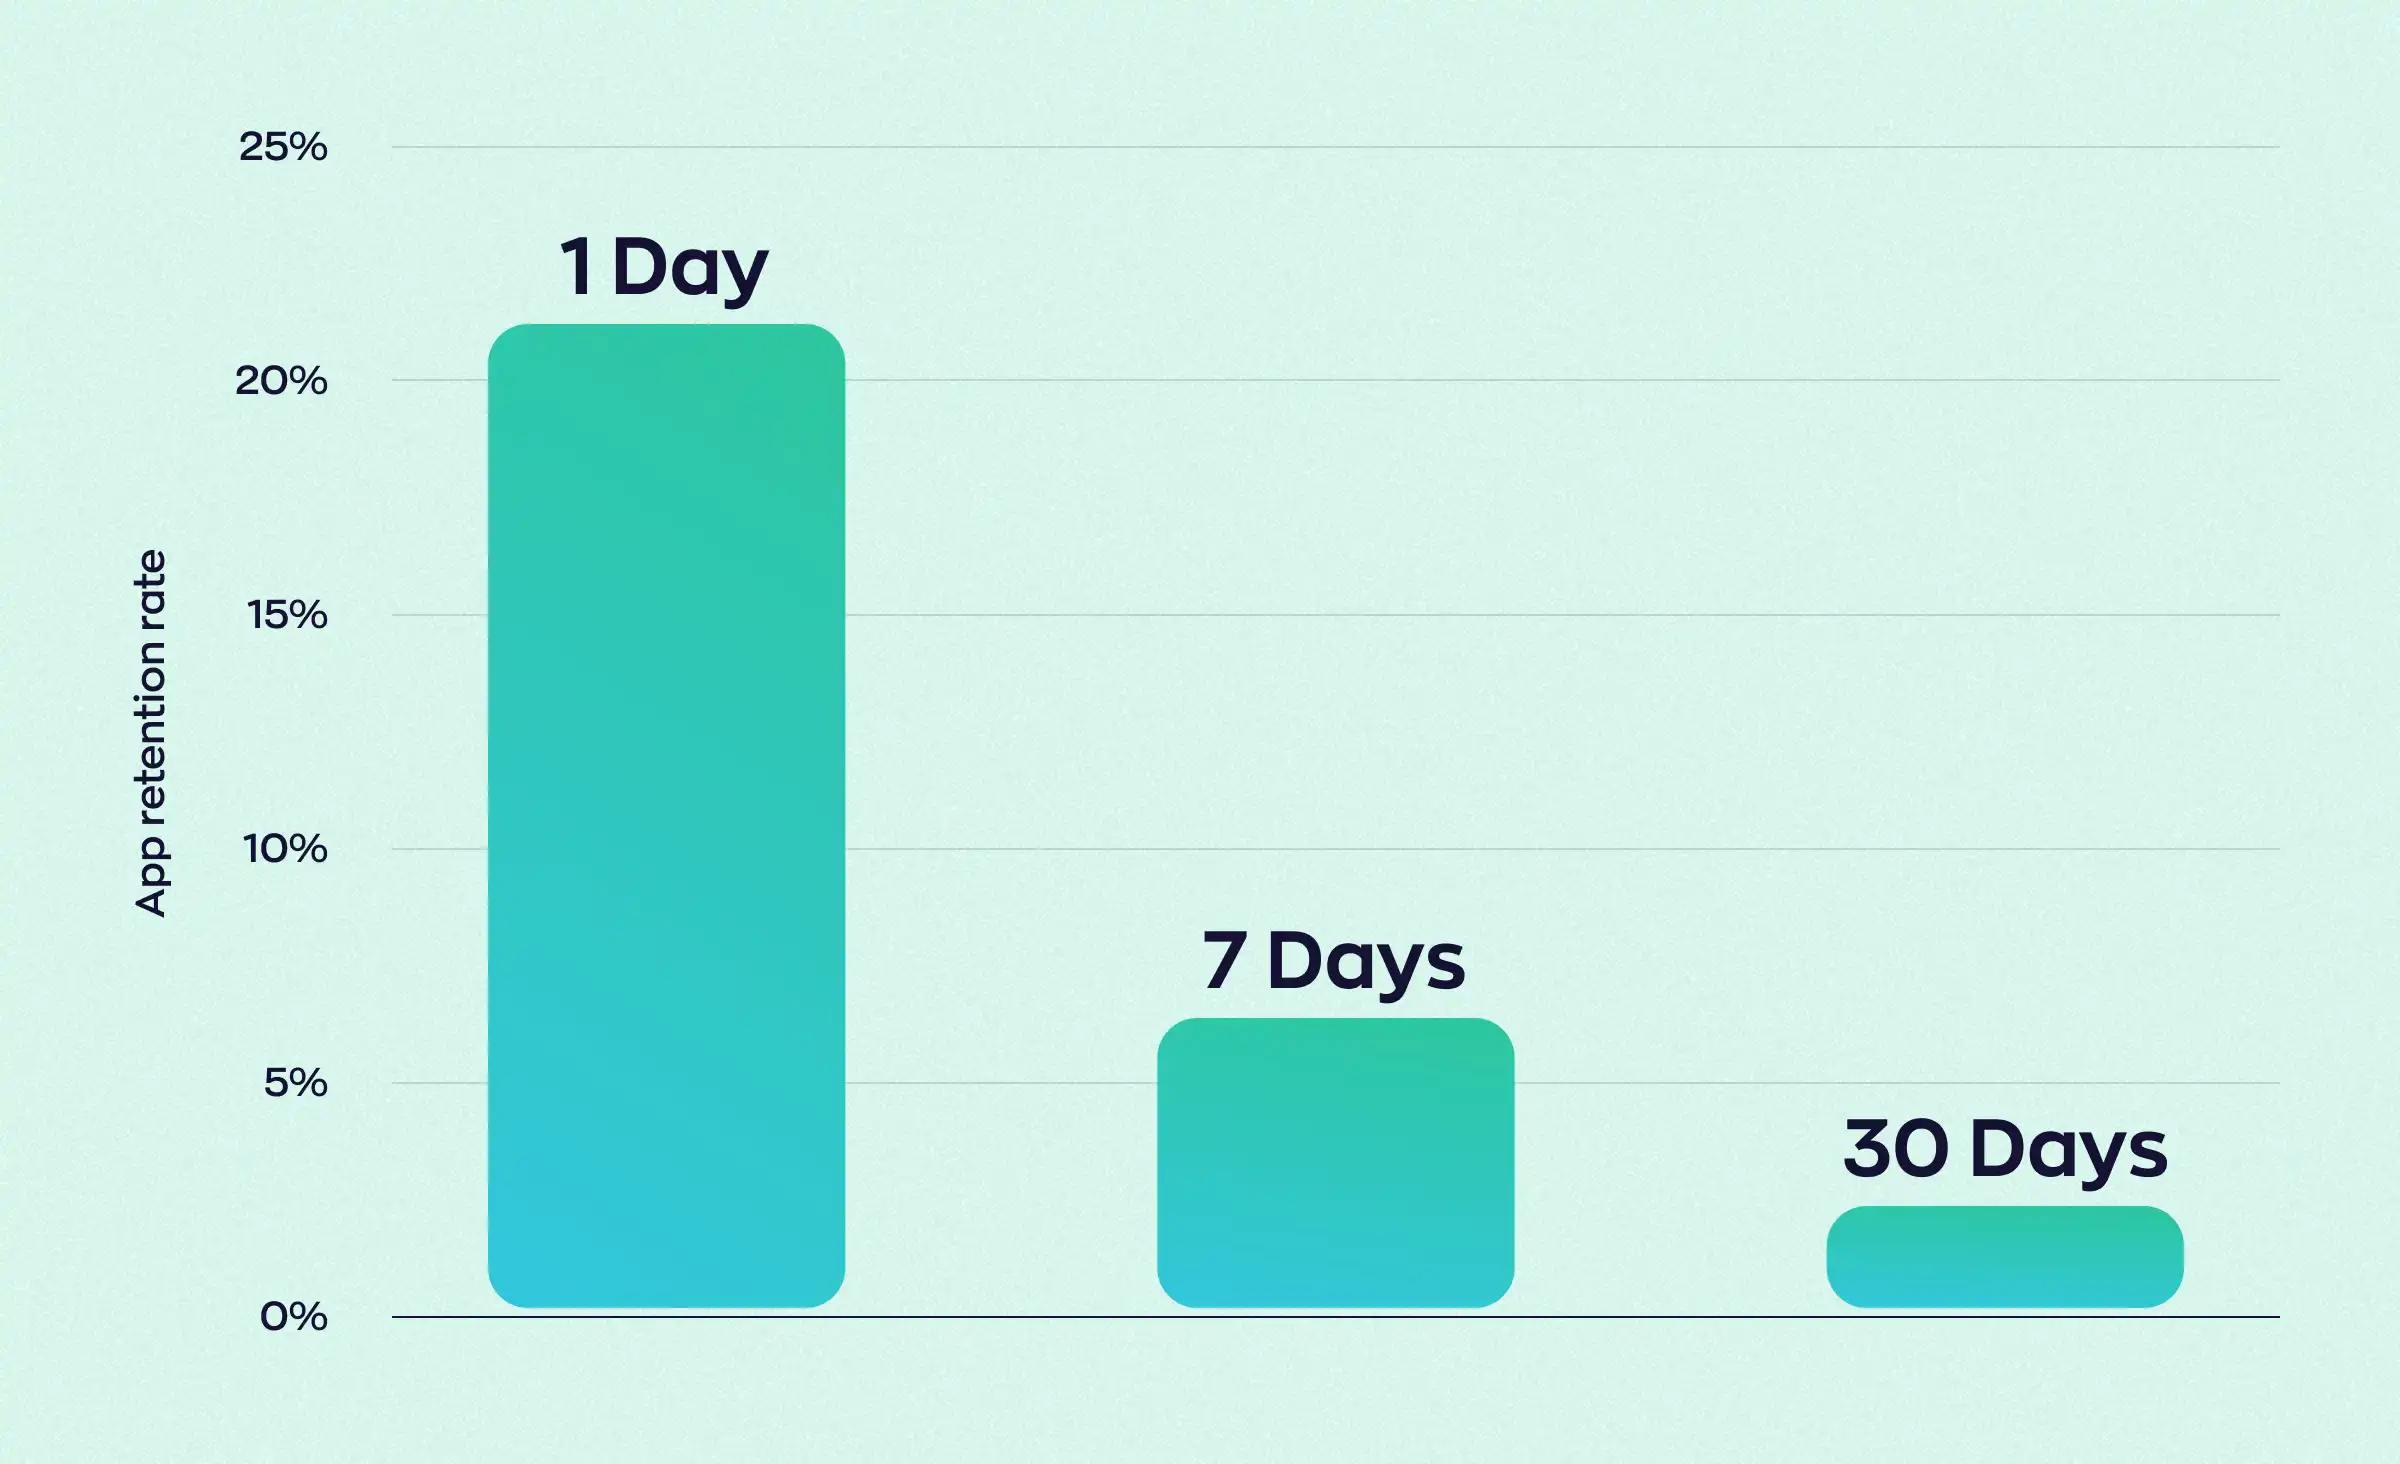 Statistics show the user retention rate for different days of Android mobile app usage. It indicates that over 20% stay after the first day, less than 10% remain after the 7th day, and fewer than 5% of users are still active on the mobile app after 30 days.